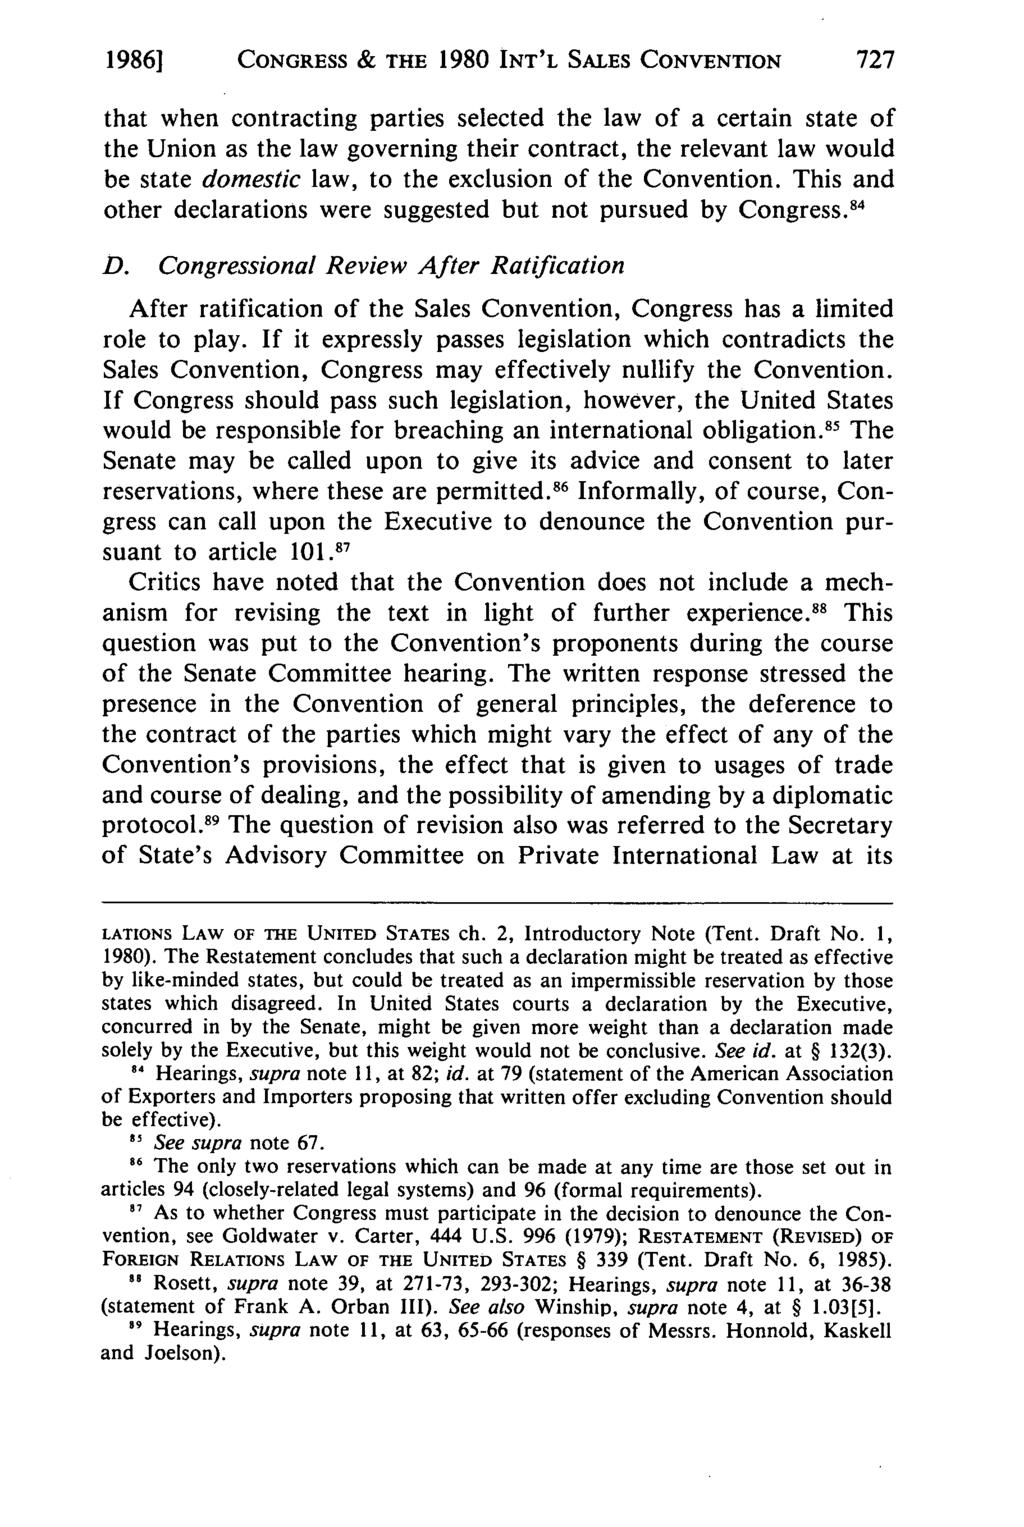 19861 CONGRESS & THE 1980 INT'L SALES CONVENTION that when contracting parties selected the law of a certain state of the Union as the law governing their contract, the relevant law would be state